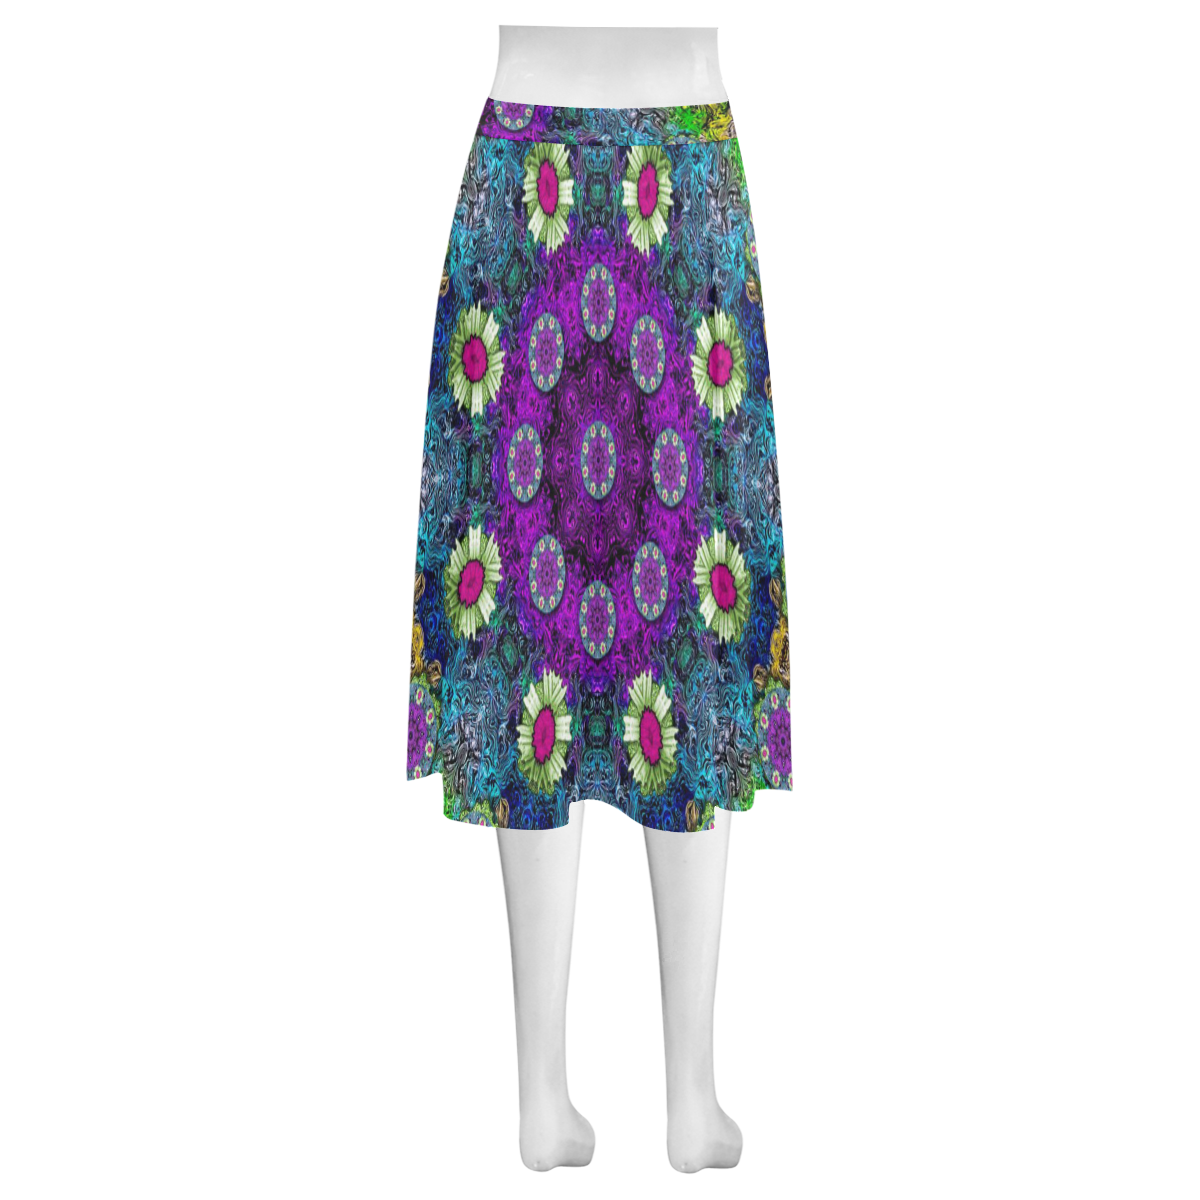 Colors and flowers in a mandala Mnemosyne Women's Crepe Skirt (Model D16)